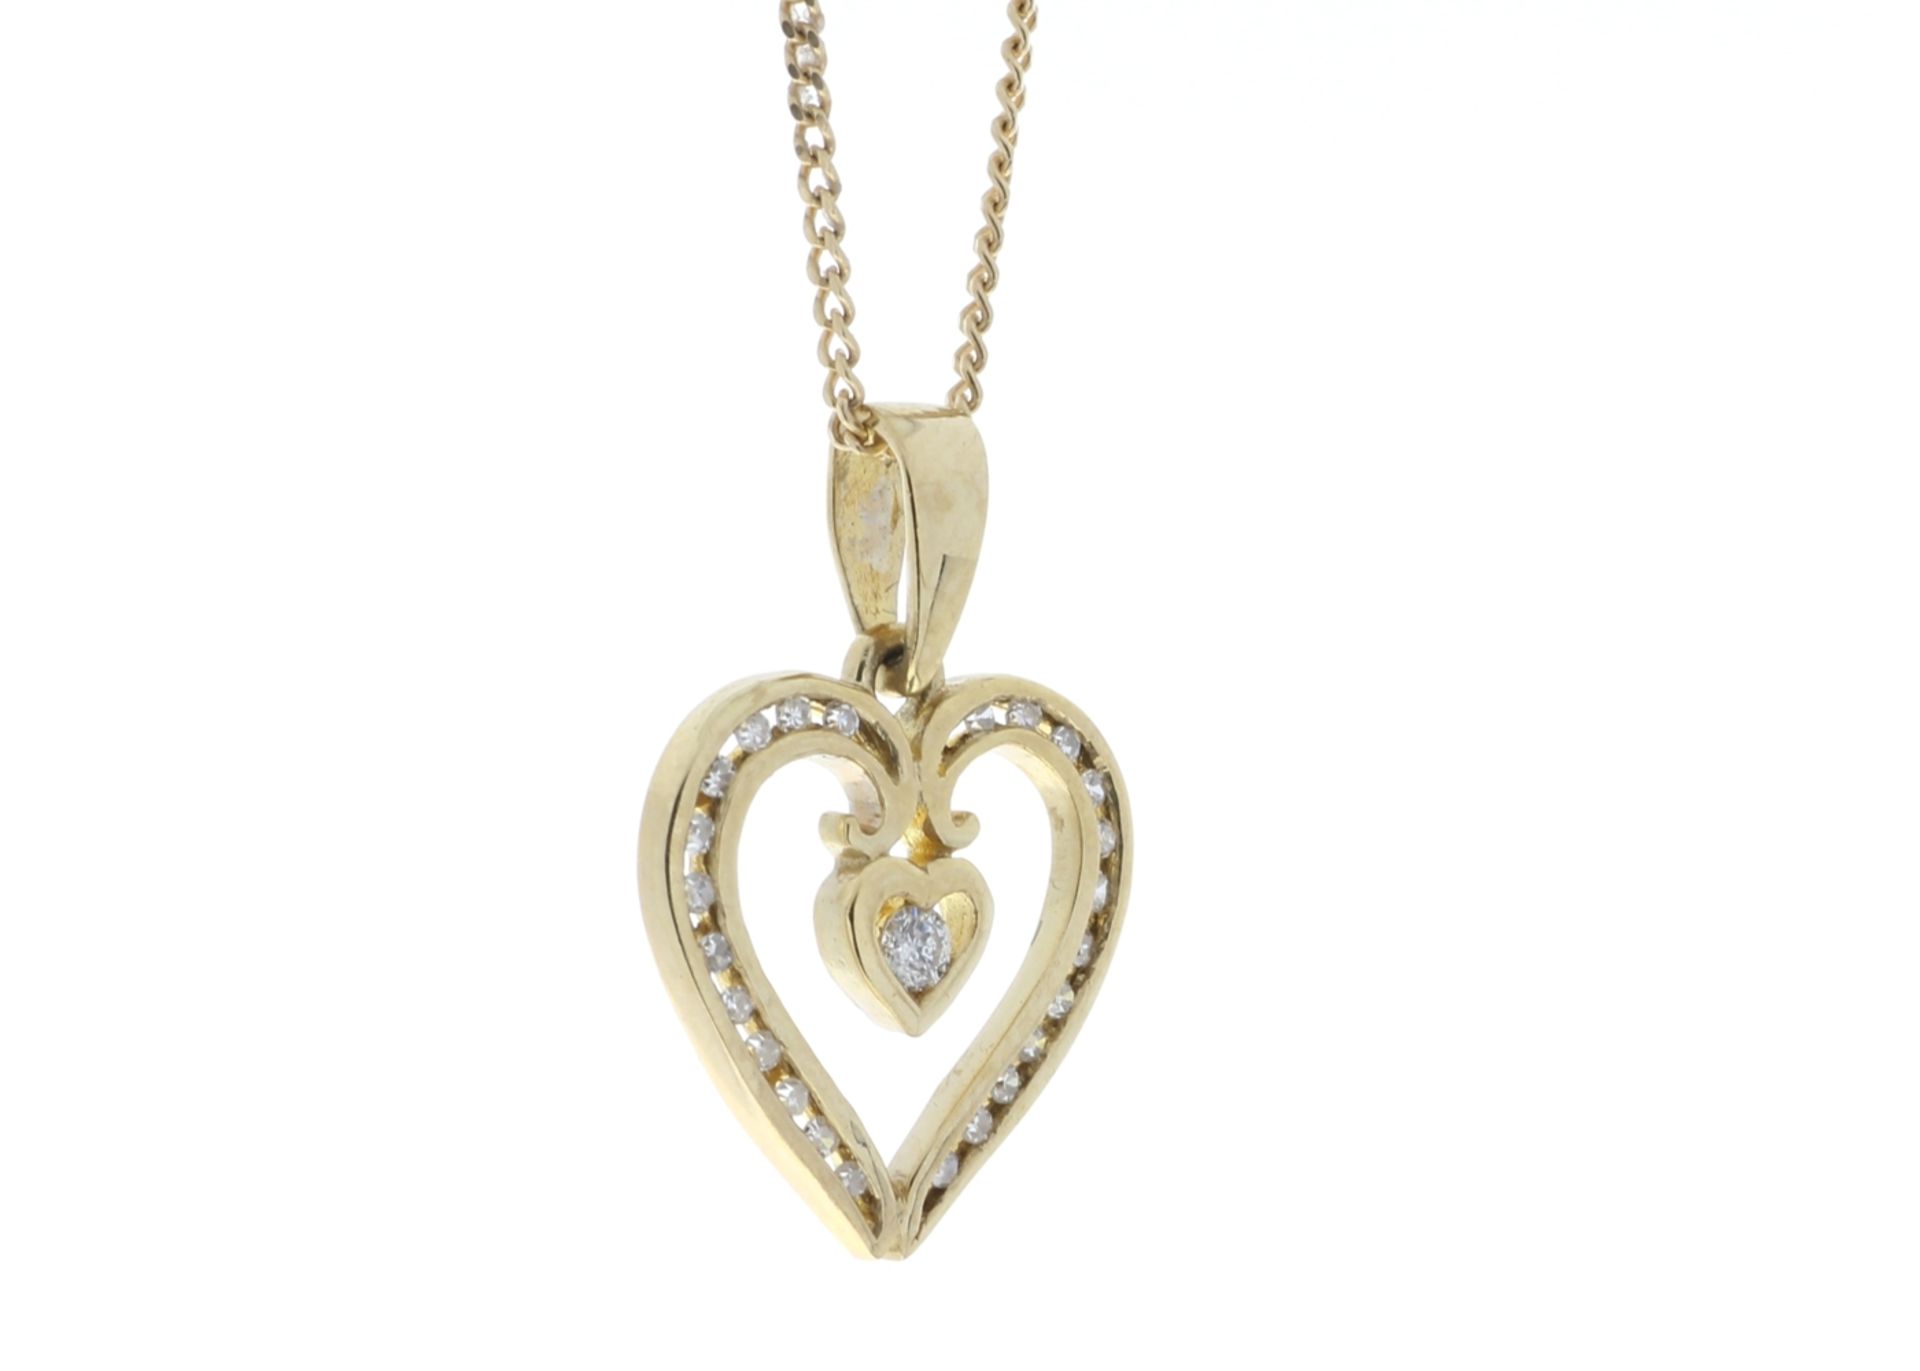 9ct Yellow Gold Heart Shaped Pendant Set With Diamonds 0.16 Carats - Valued by GIE £1,145.00 - 9ct - Image 2 of 5